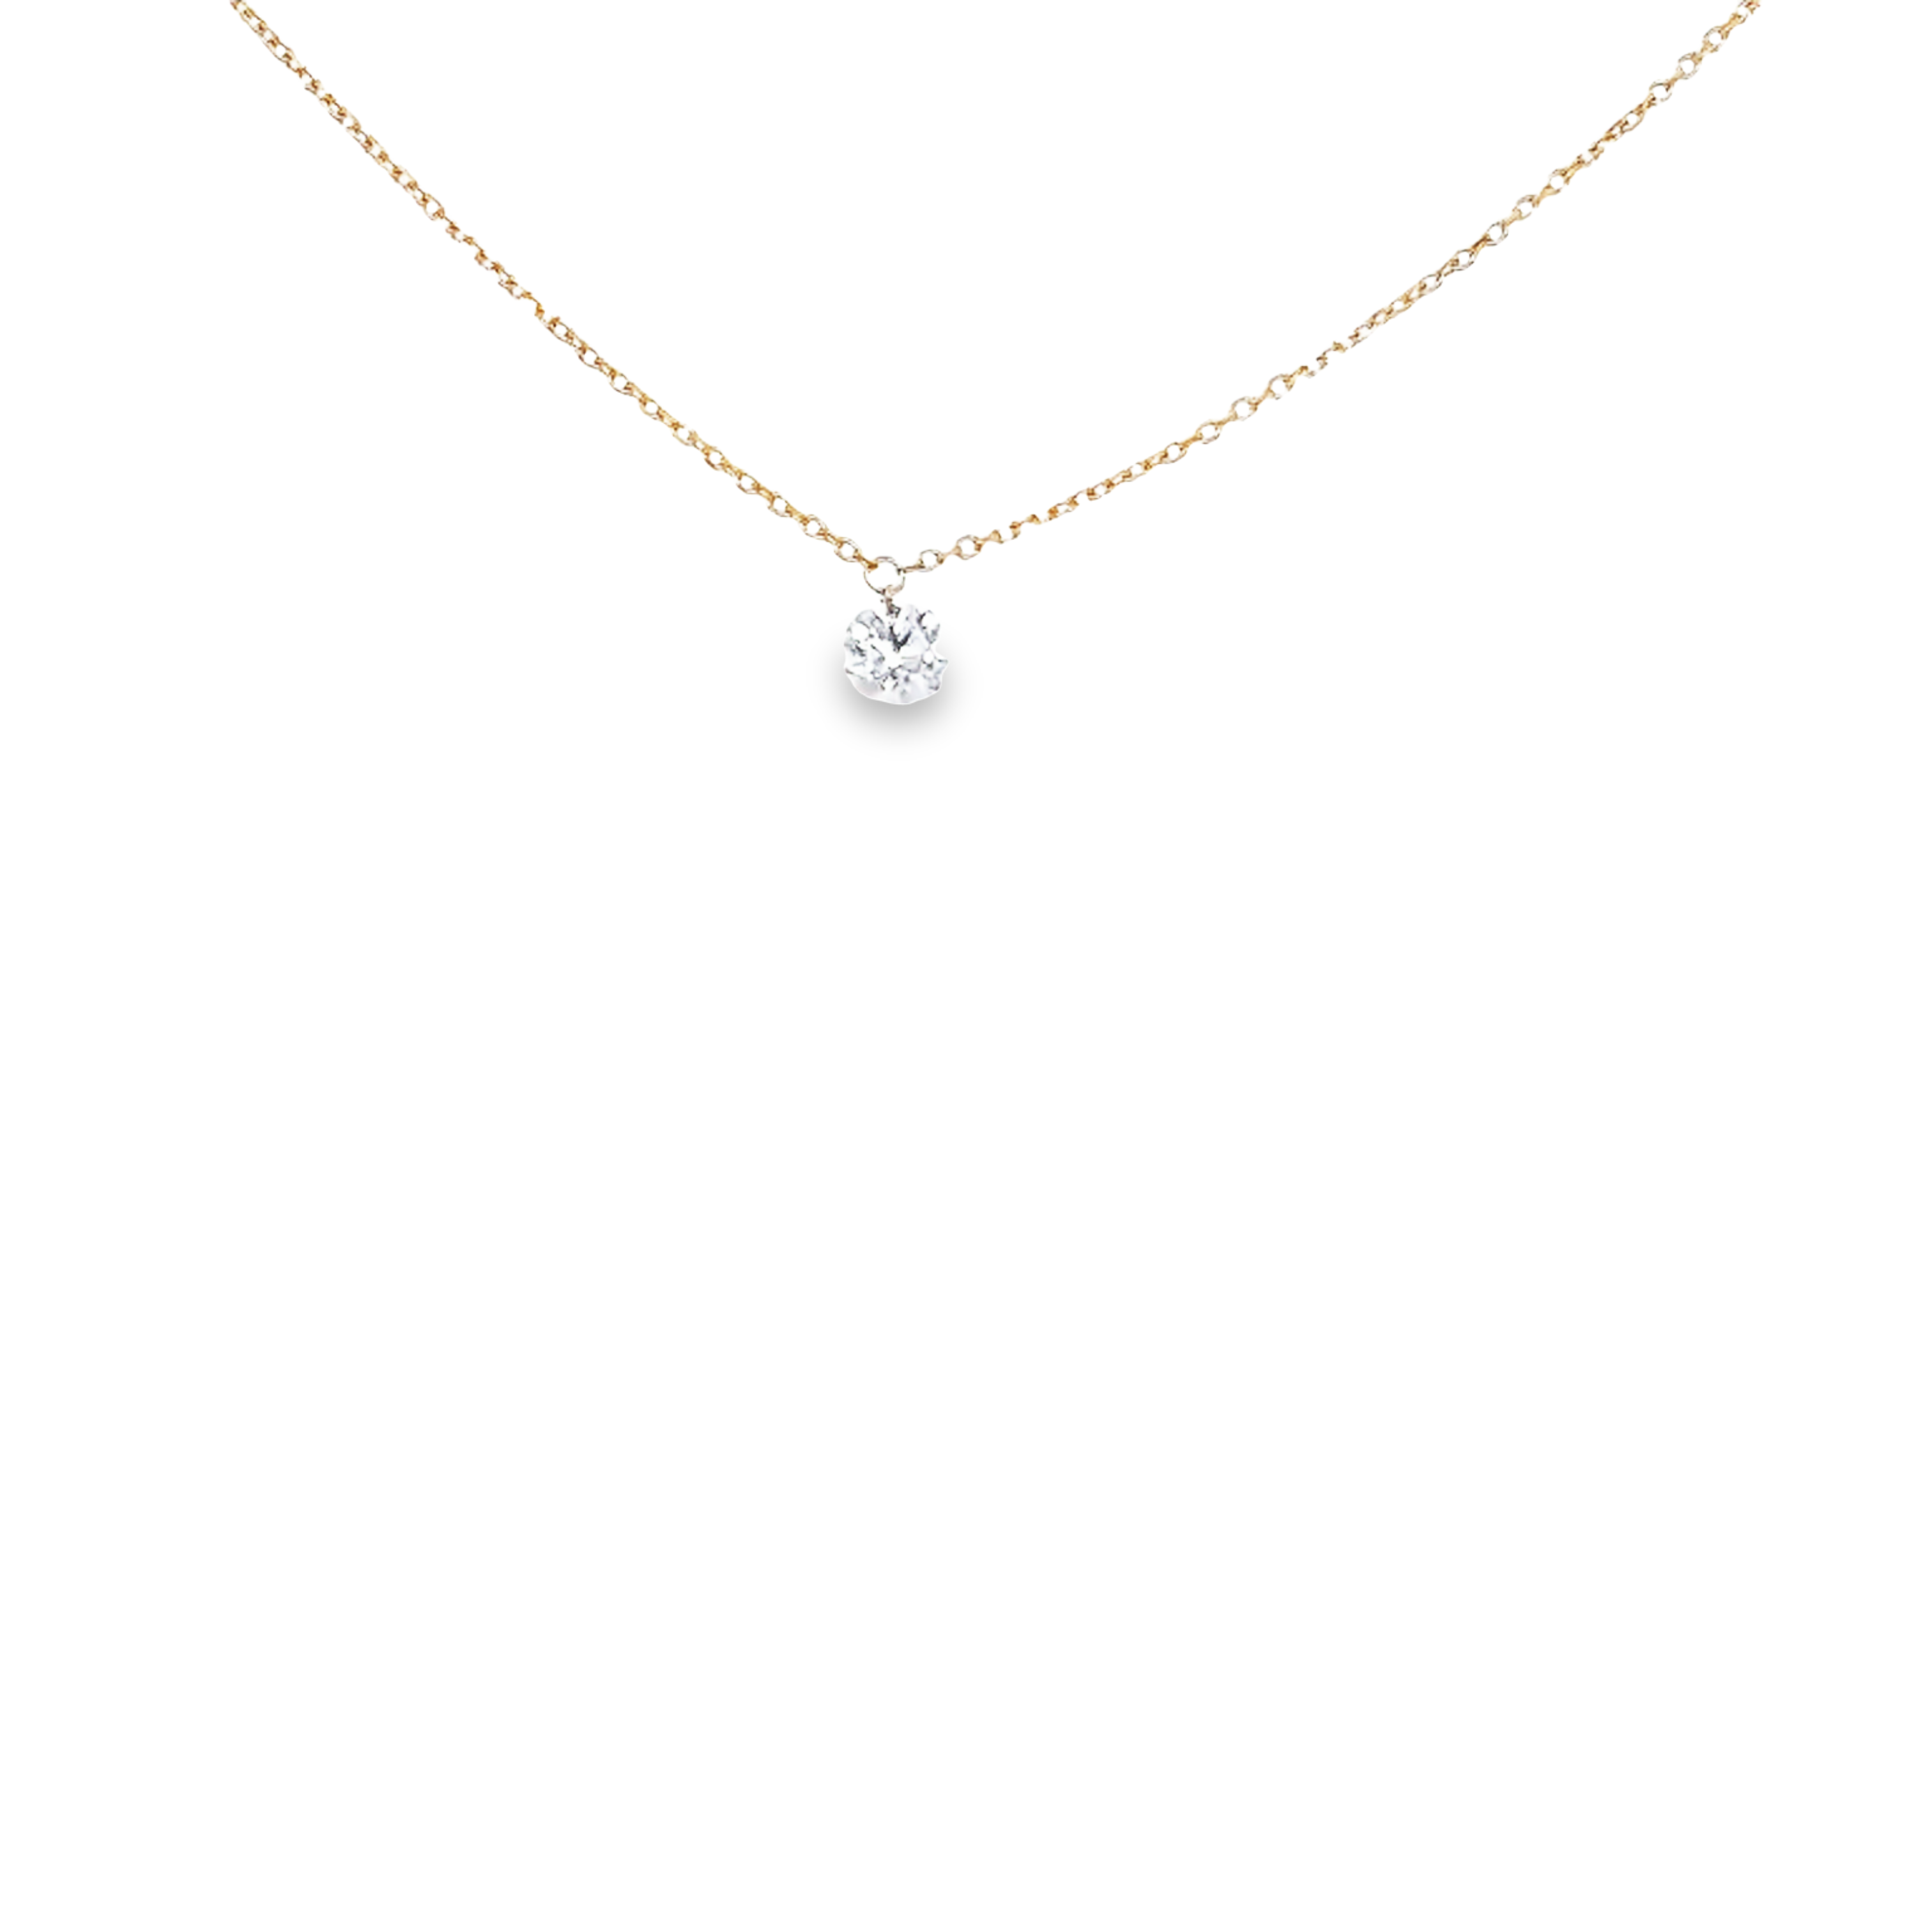 14 Karat yellow gold solitaire necklace with One 0.33Ct Round Brilliant G I Diamond